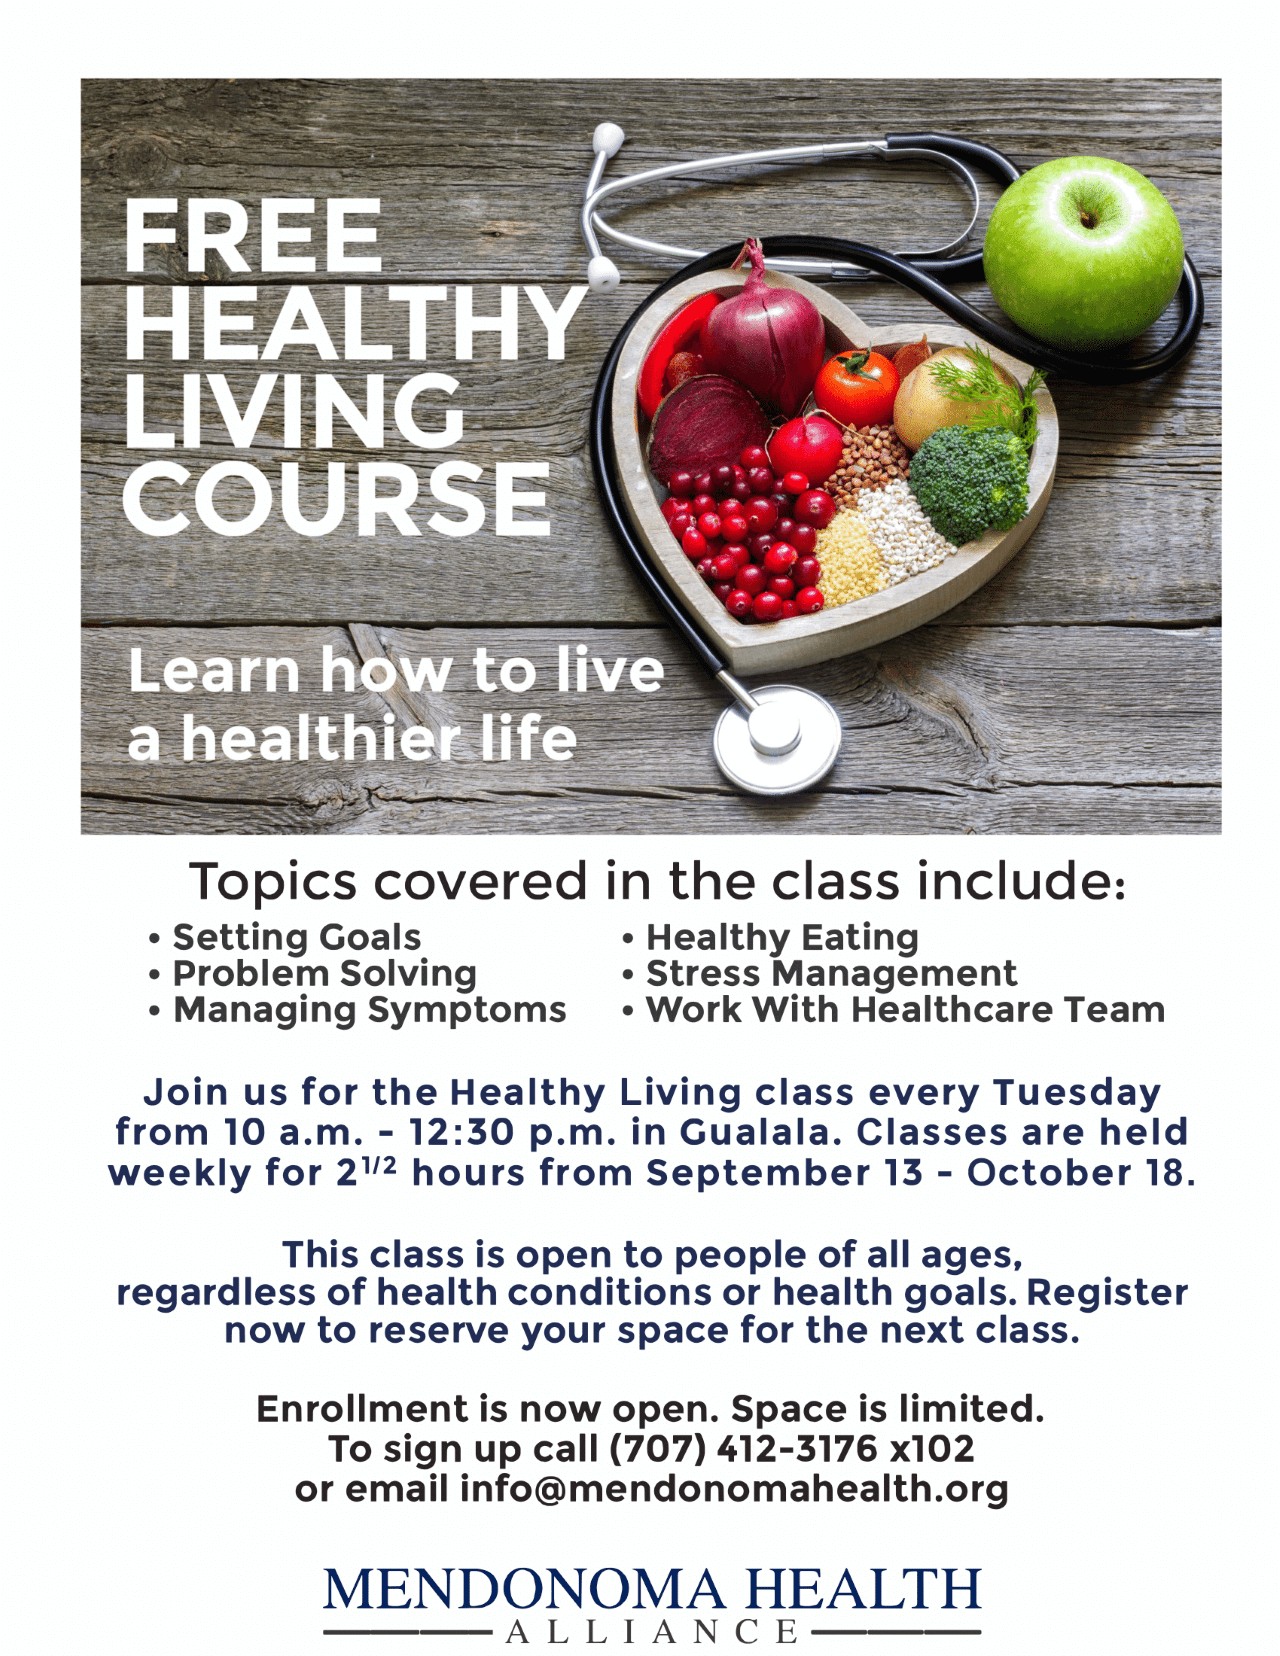 Flyer with apple, stethoscope & fresh vegetables in a heart shaped bowl advertising a Free Healthy Living Class in Gualala starting on Sept 13 - Oct 18. Register by calling (707) 412-3176 x102.